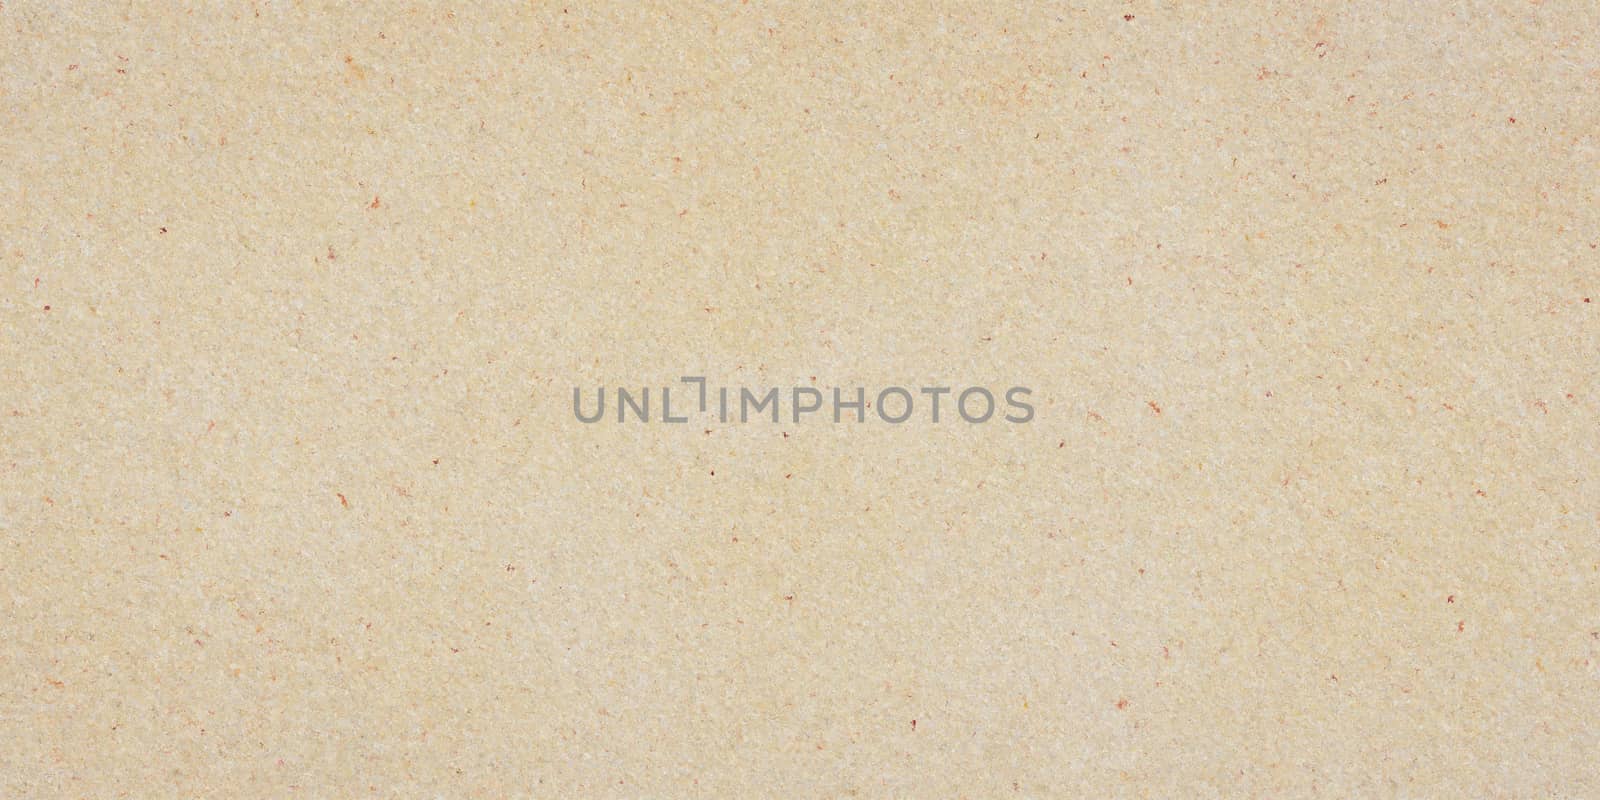 Paper texture background, kraft yellow paper surface texture, horizontal background for design, Soft natural paper style